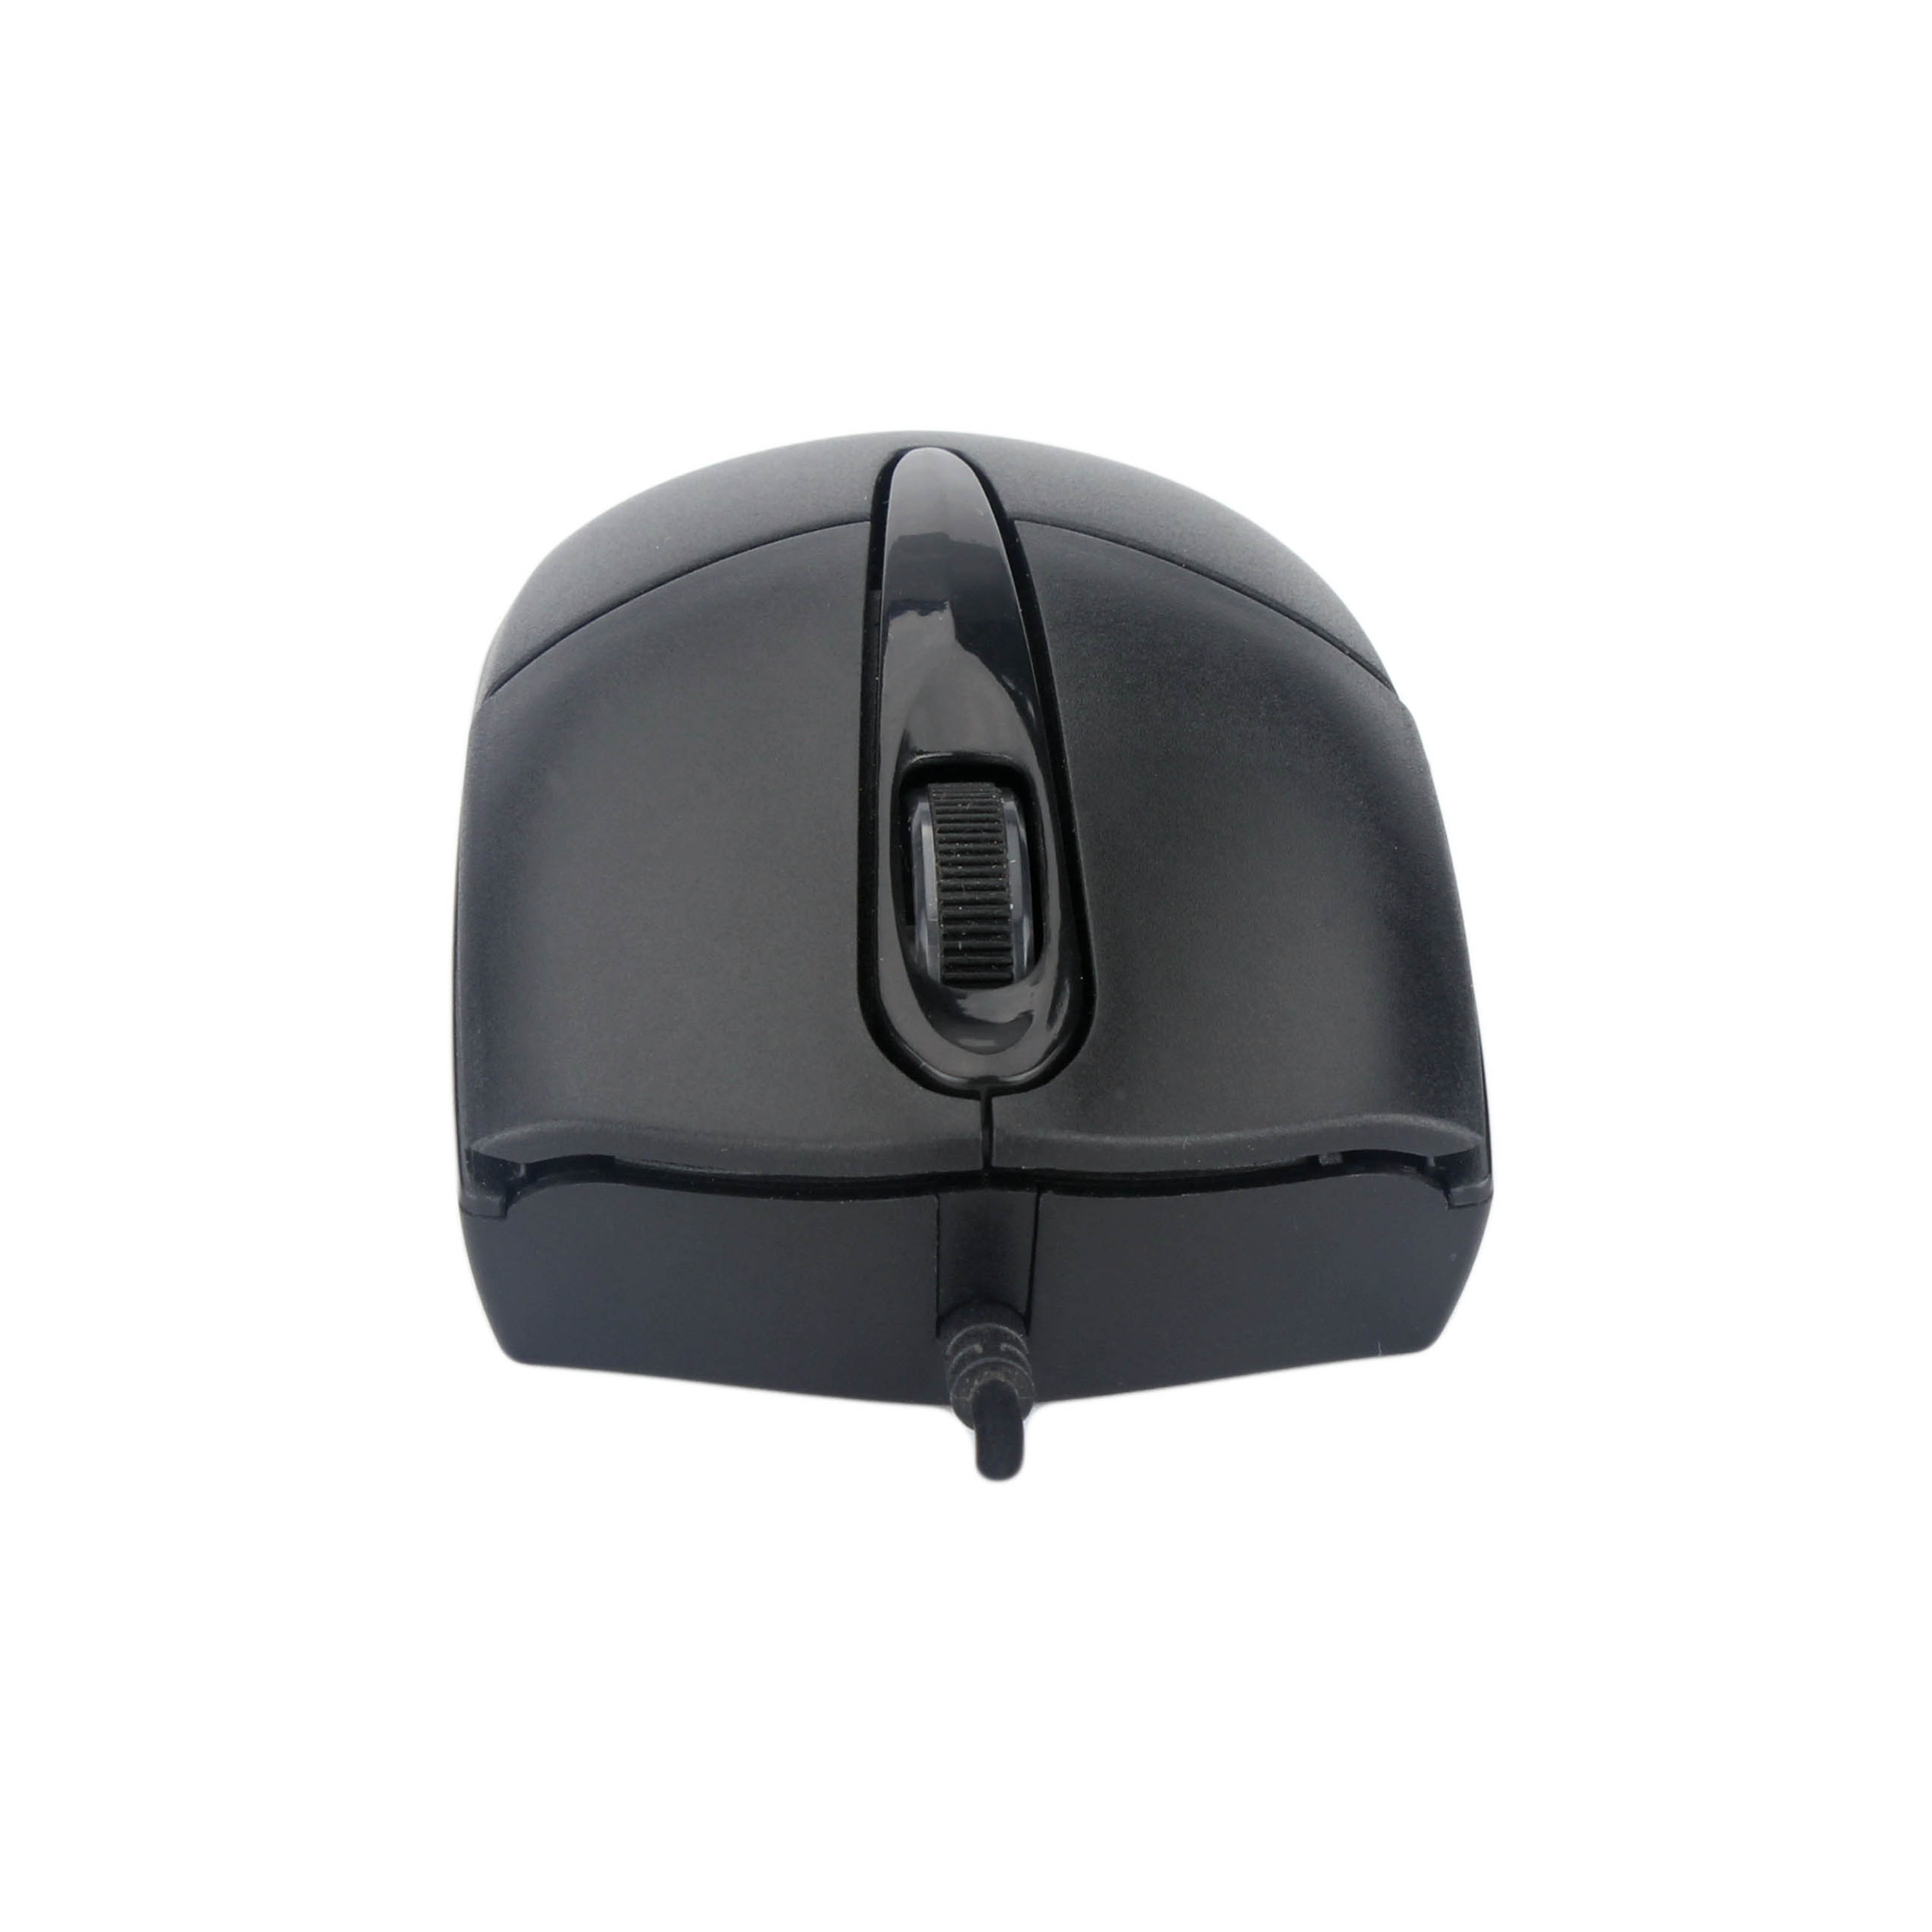 USB Mouse Big Size,Classic Office Design